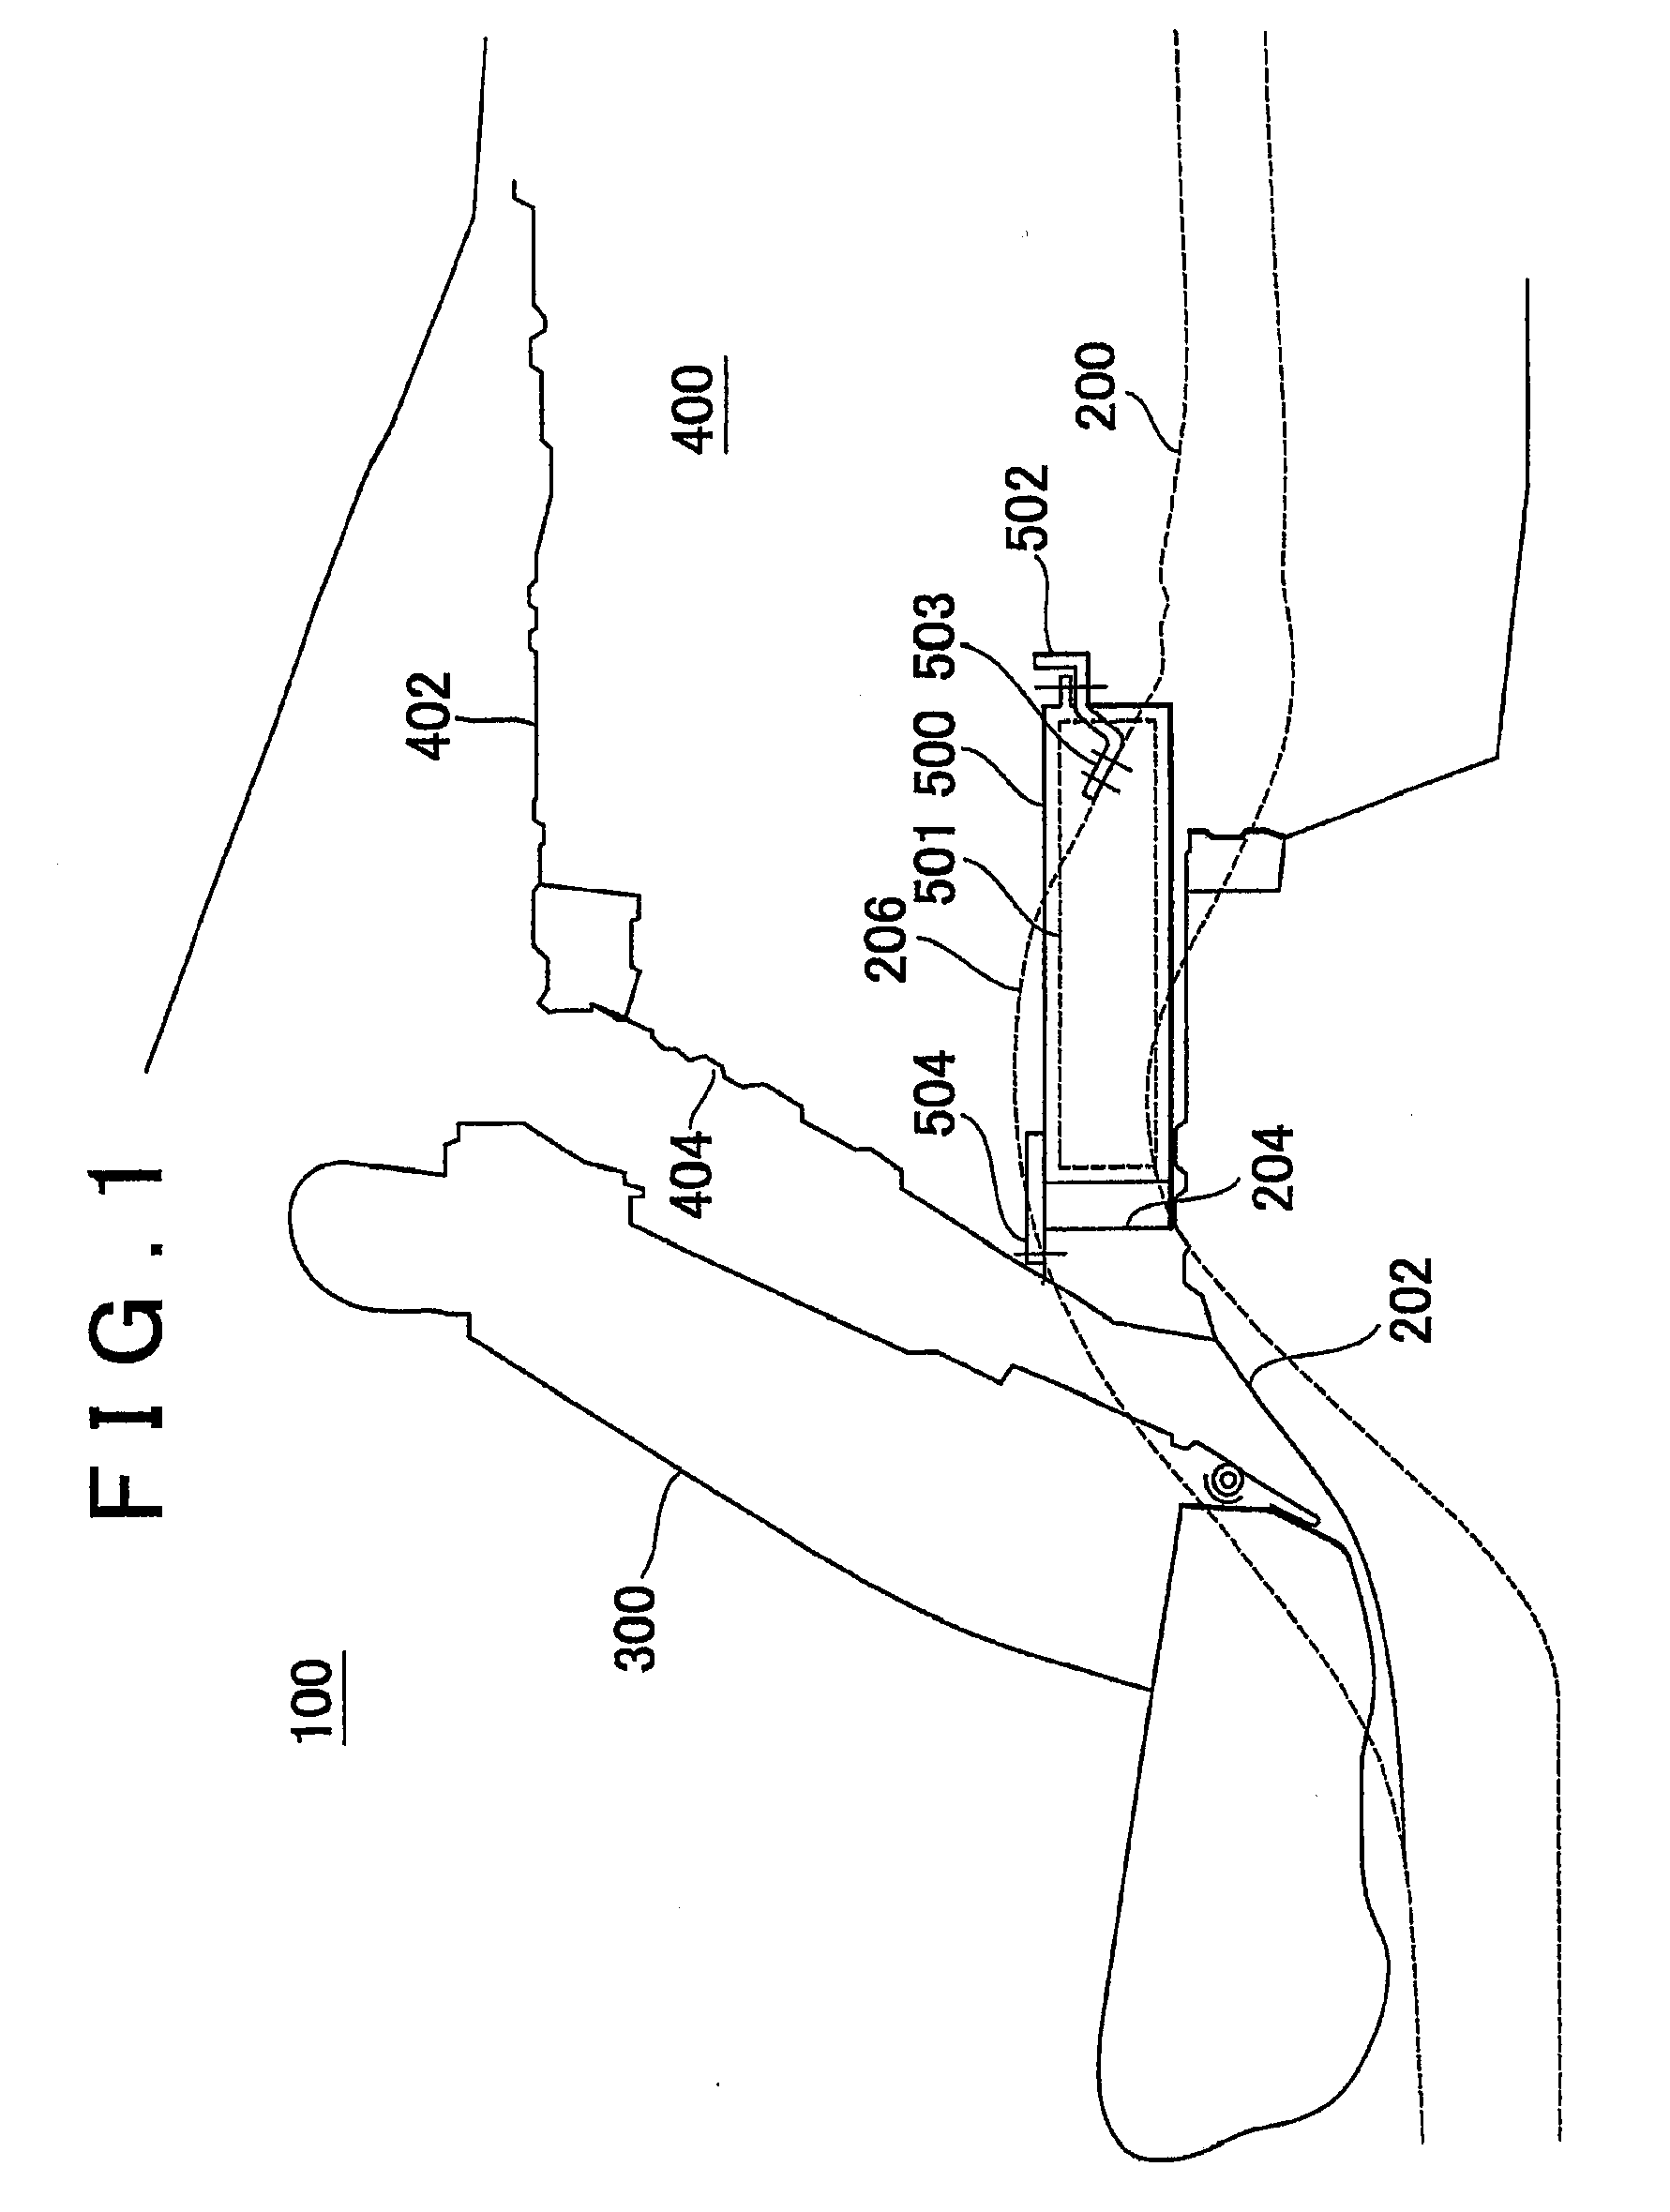 Mounting structure for storage battery device